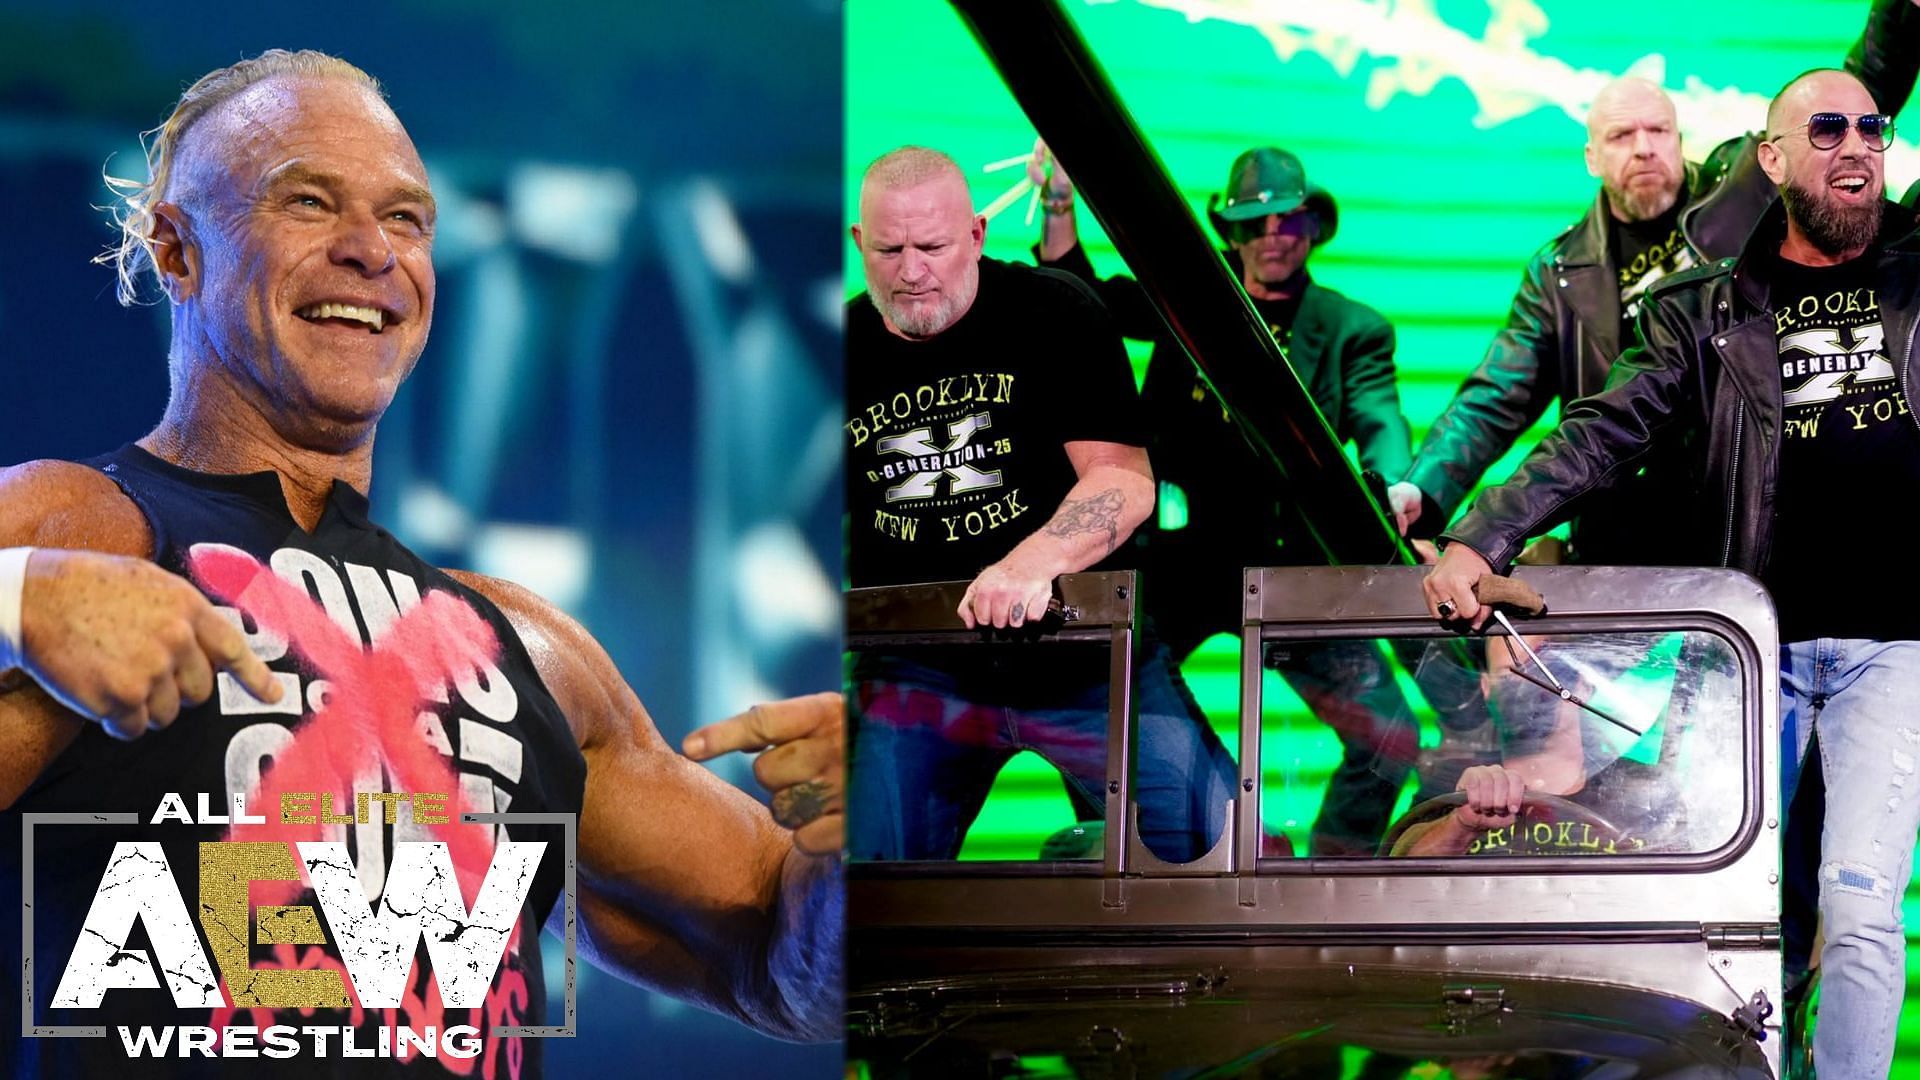 Gunn in AEW (left), DX during the latest WWE RAW (right).